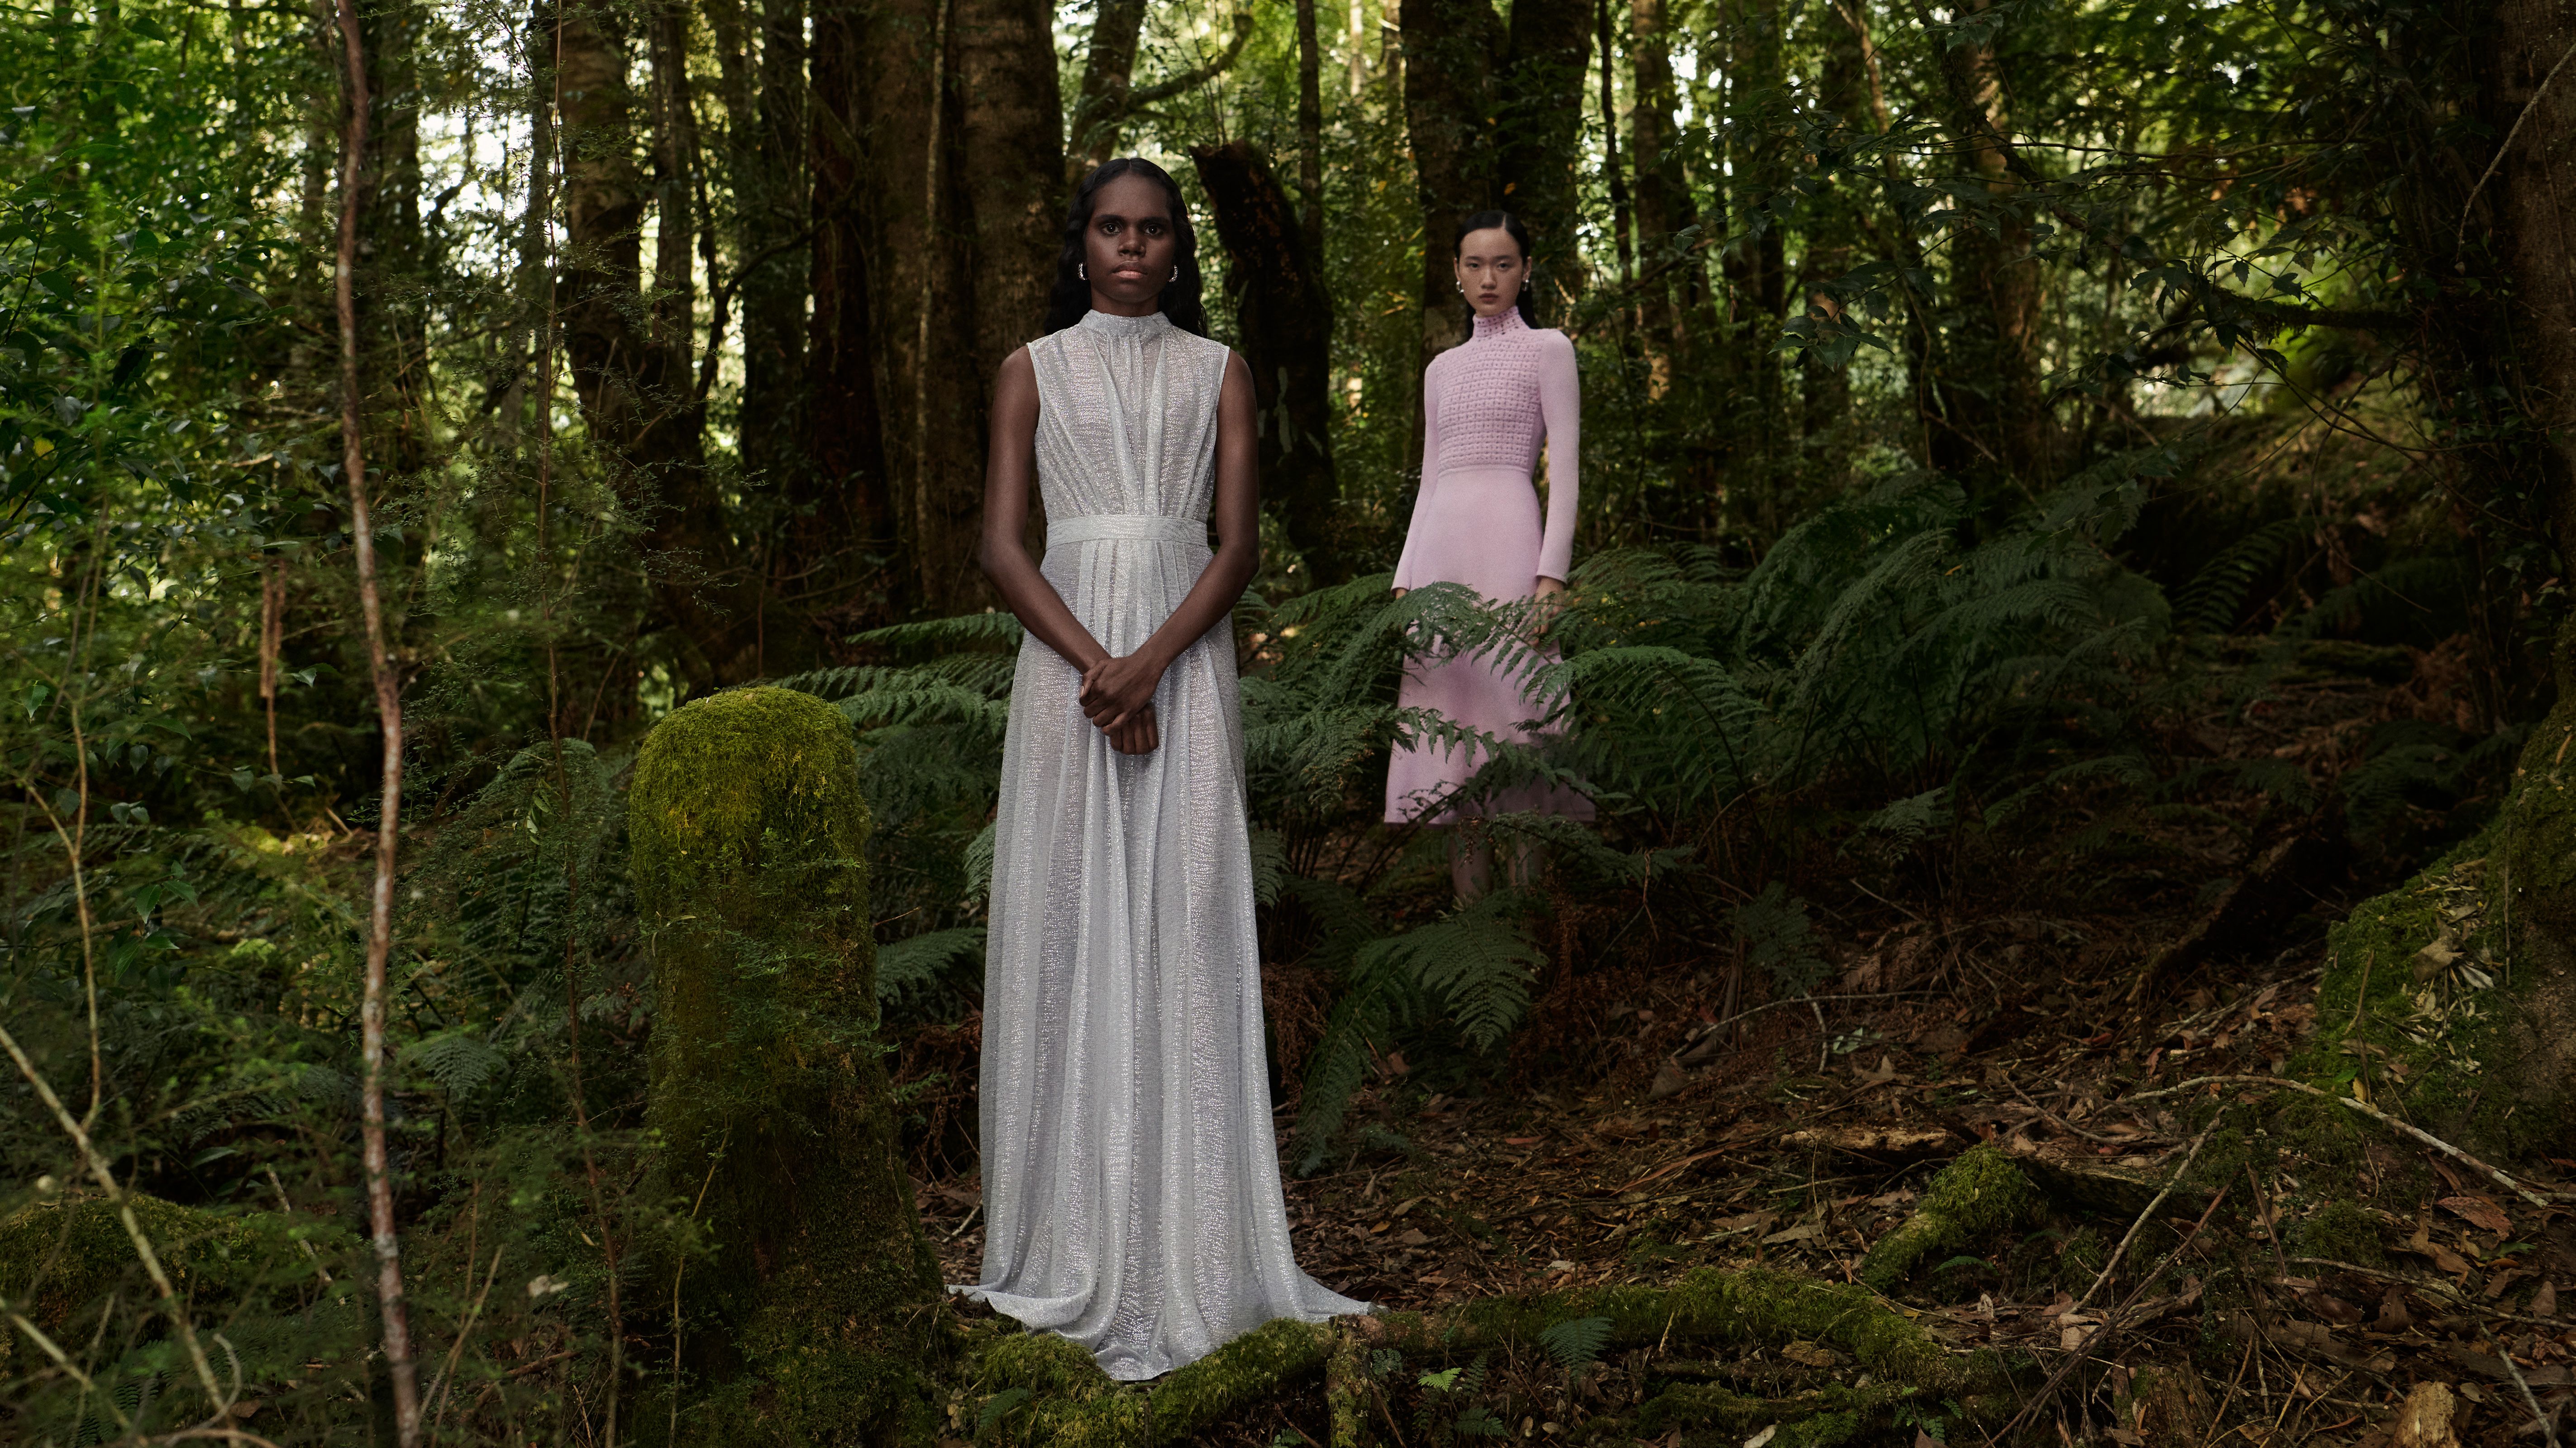 Tarlisa Gaykamangu and Venus He standing in the forest wearing a silver gown and pink dress